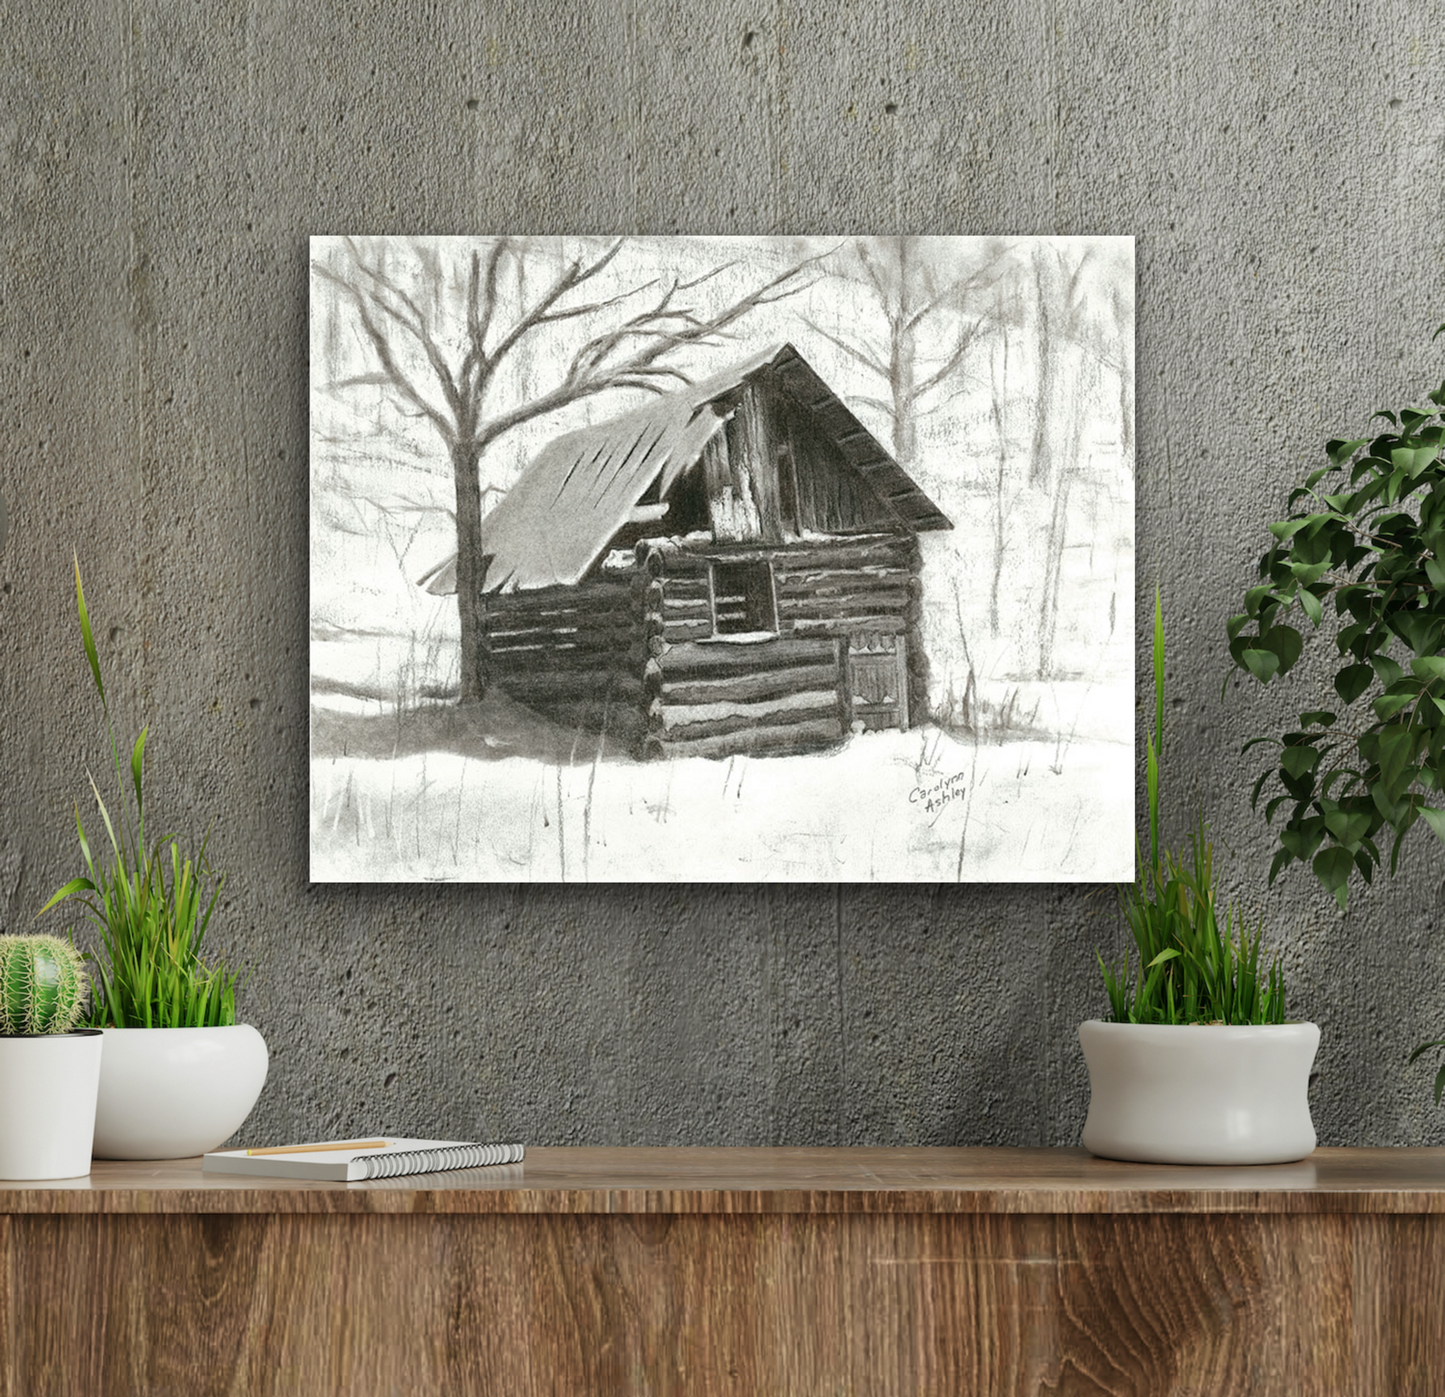 "Timeless Timber" work of art comes in three different canvas print sizes.